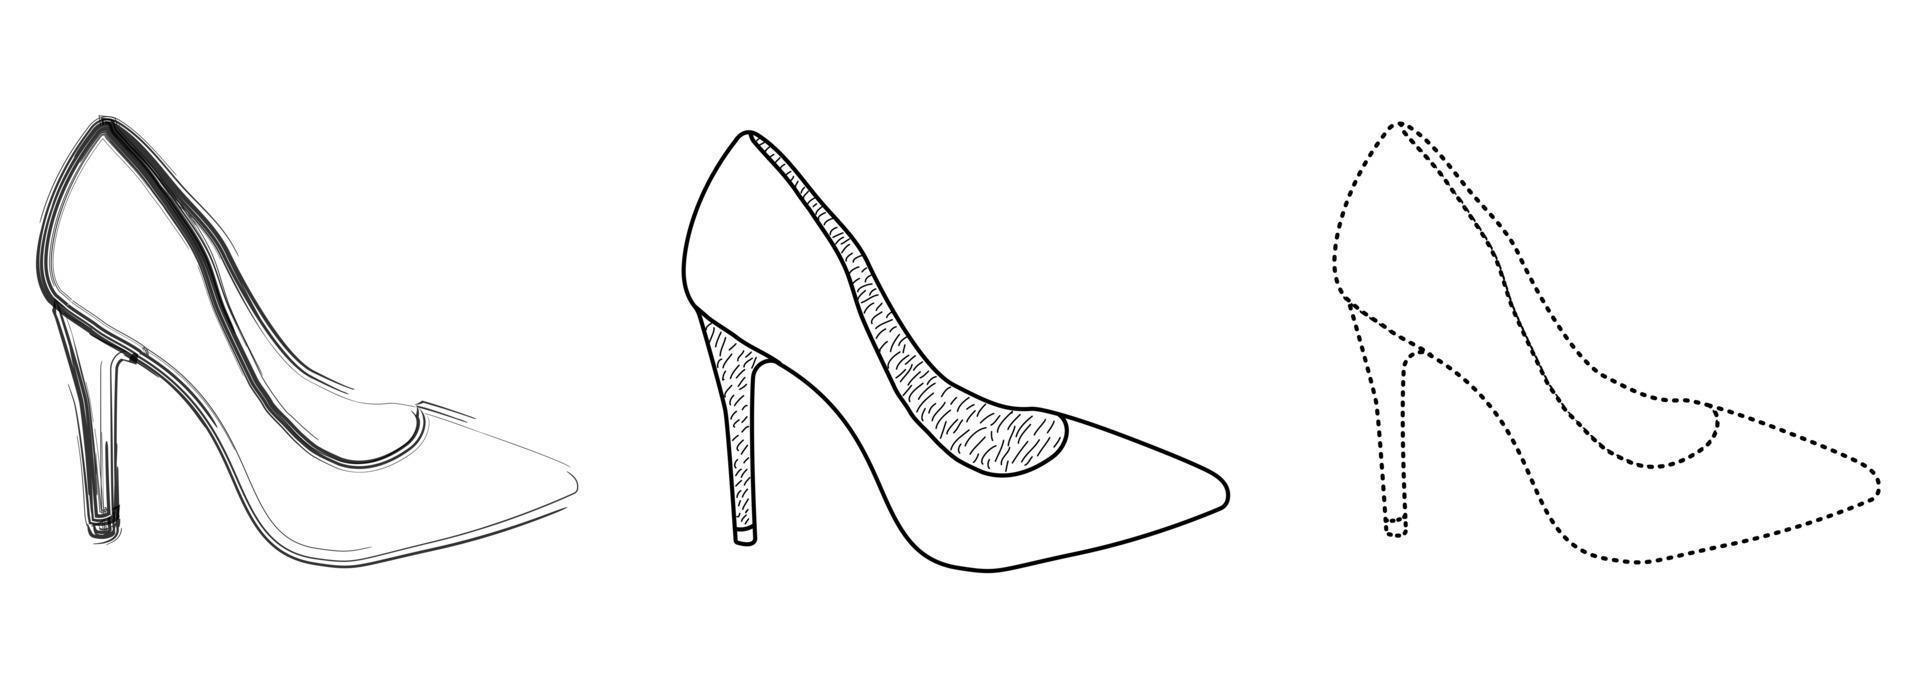 Drawing sketch outline silhouette of fashionable women's shoes. Line style and brush strokes vector